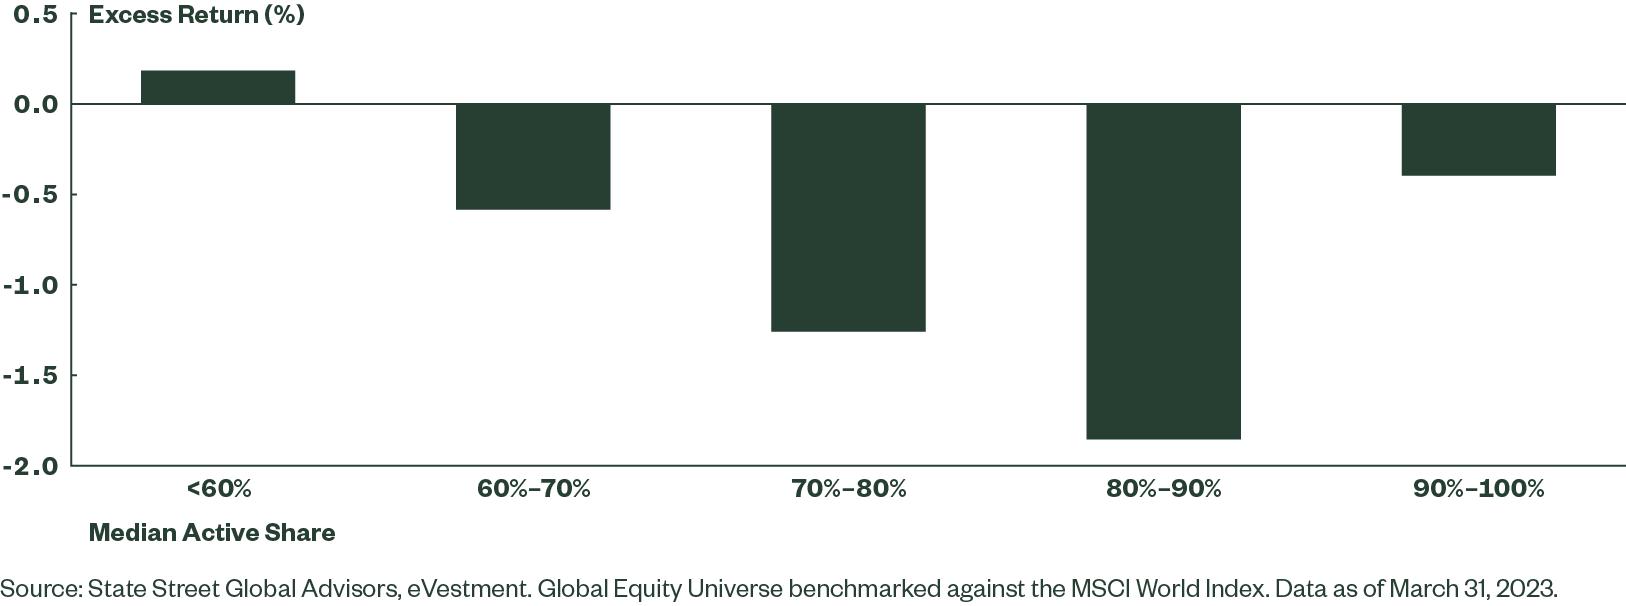 Figure 2: Global Managers’ Q1 2023 Excess Returns